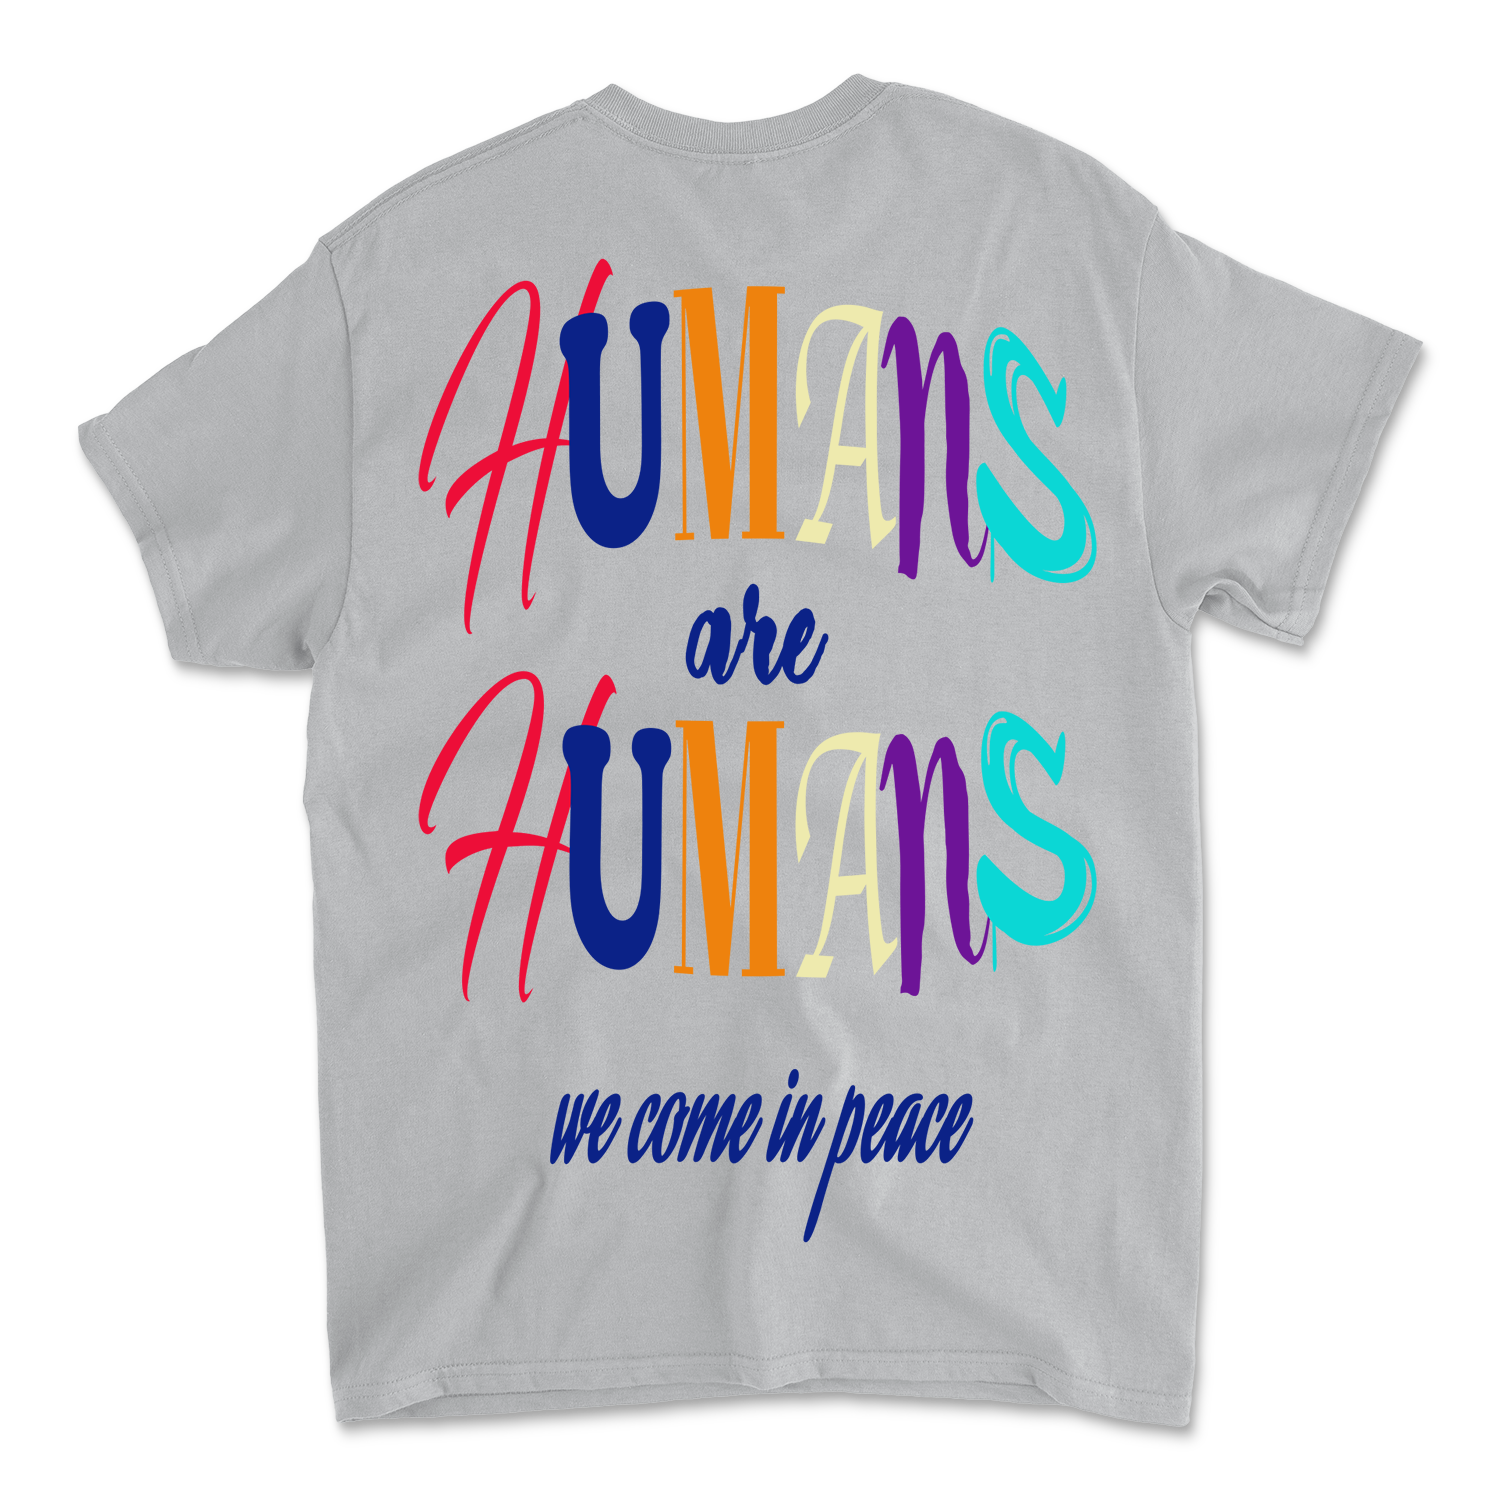 Humans are Humans Tee